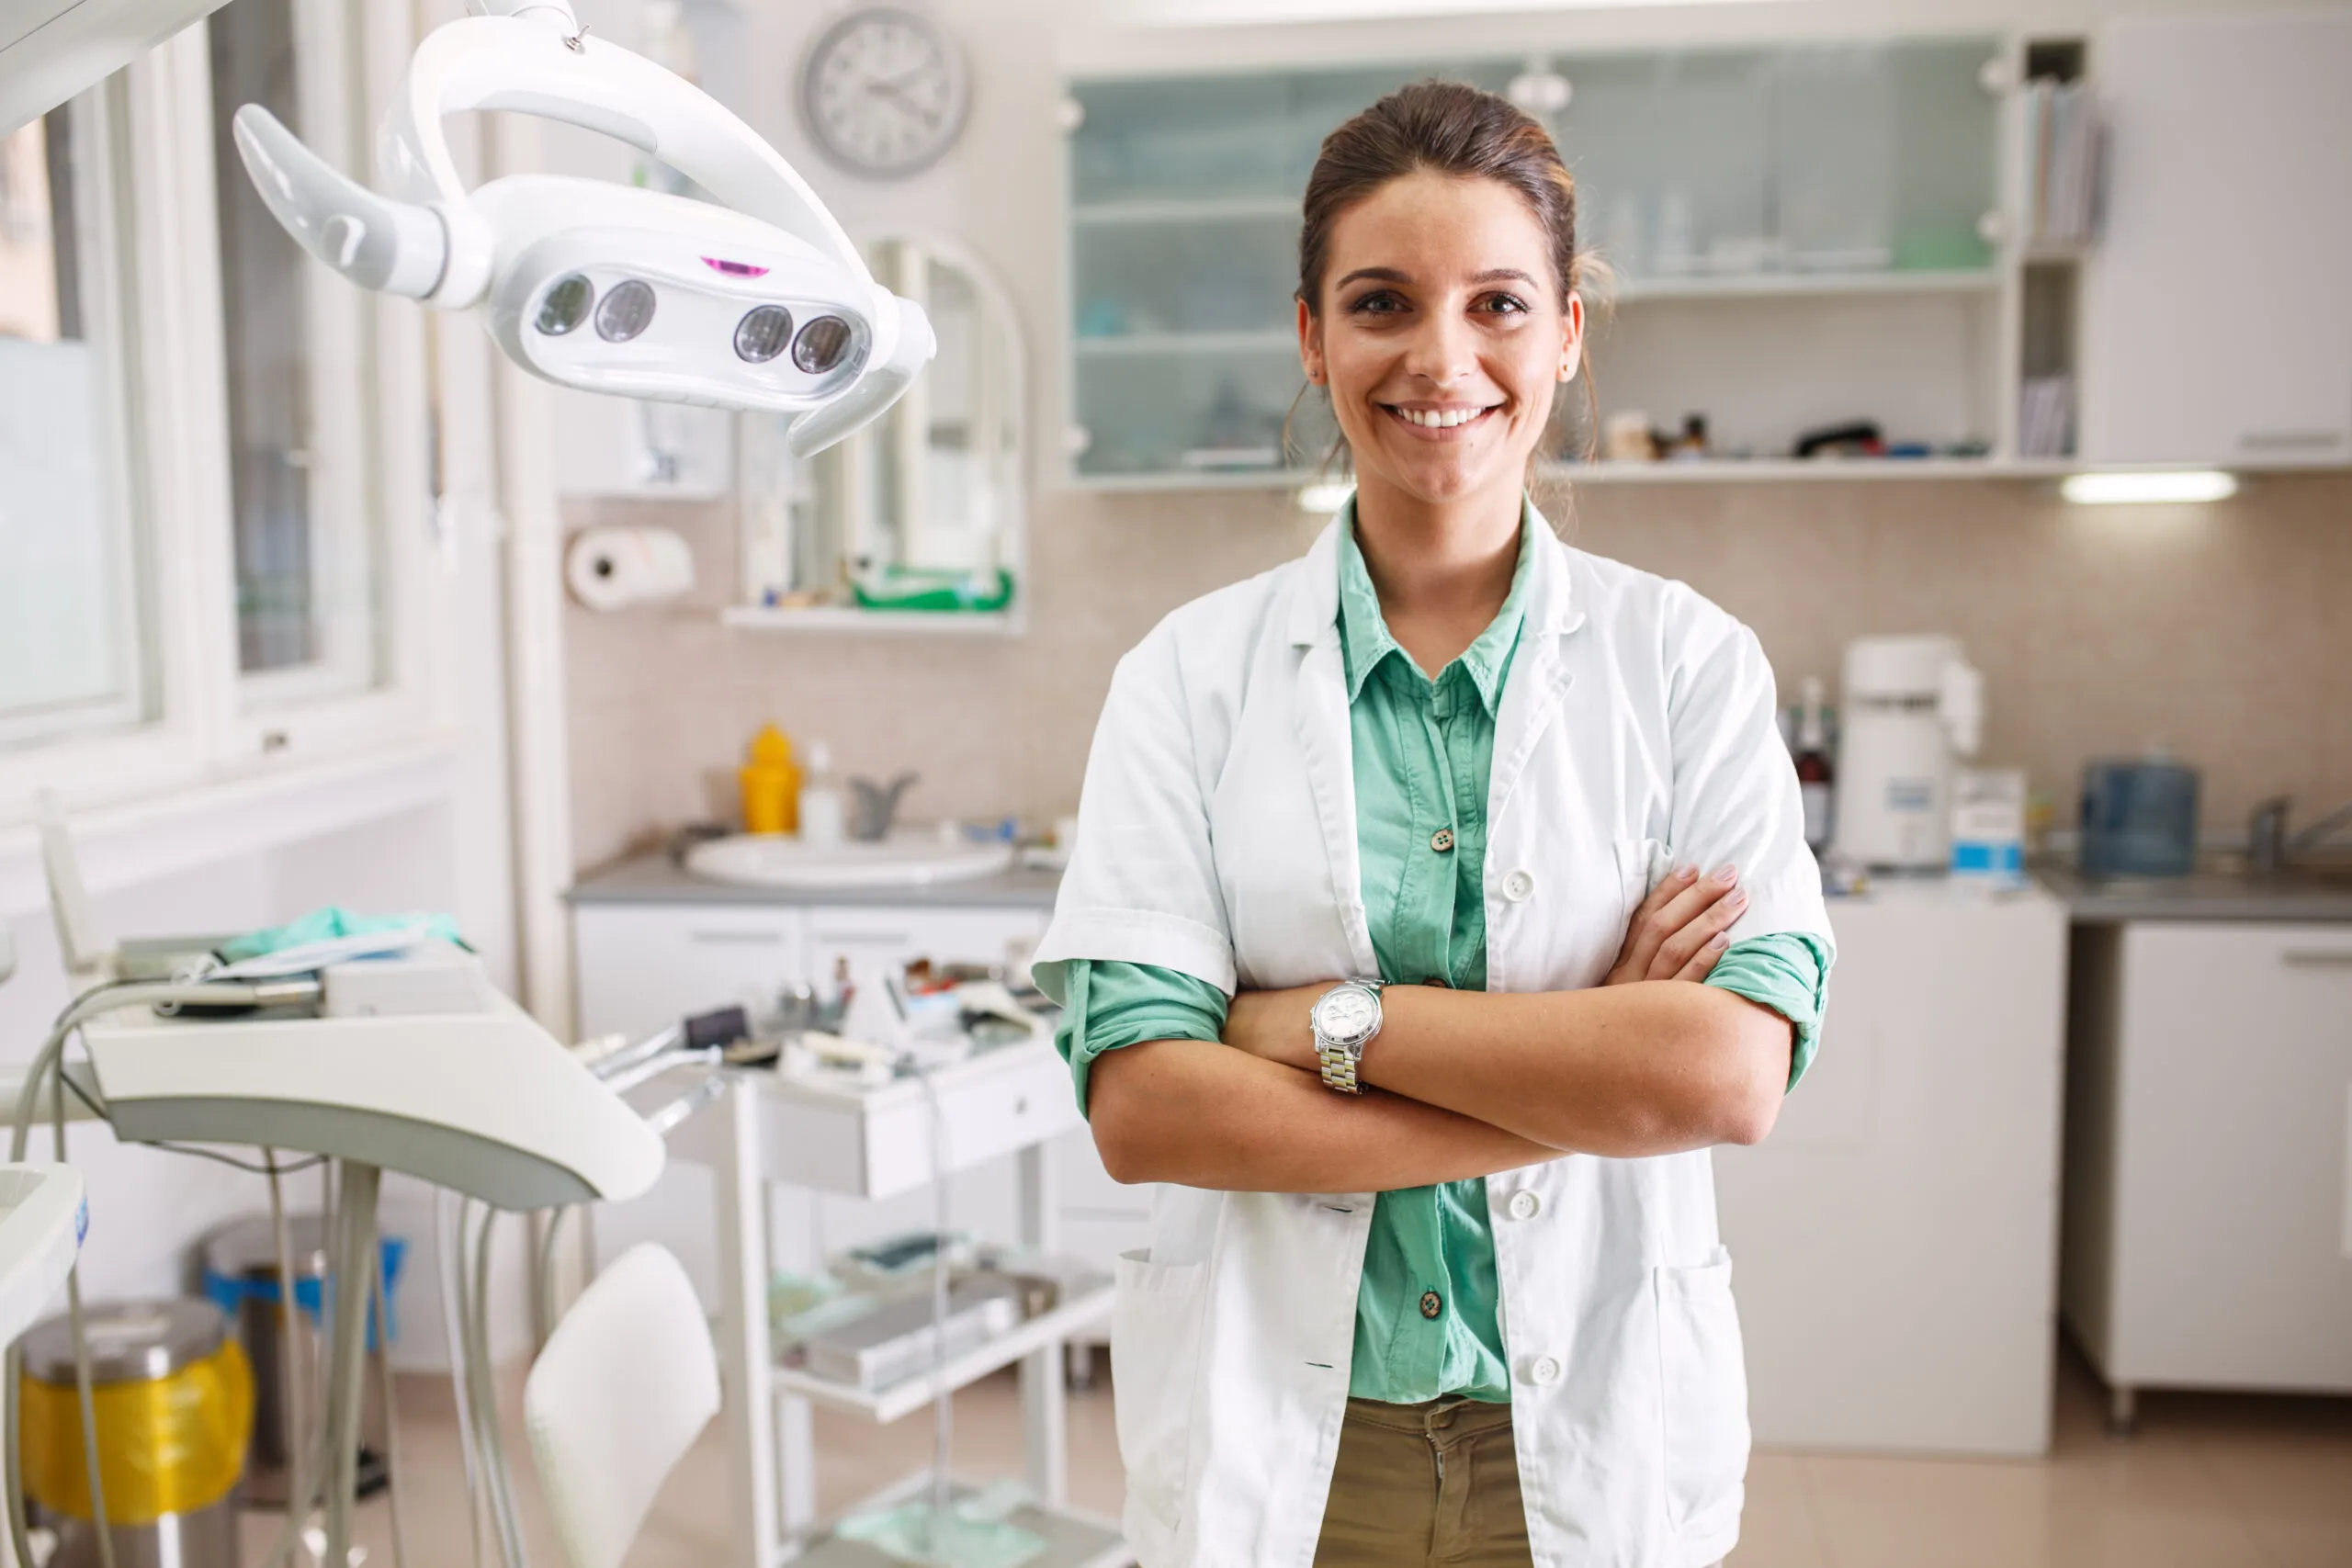 How to Find a Low-Cost or Free Dental Clinic